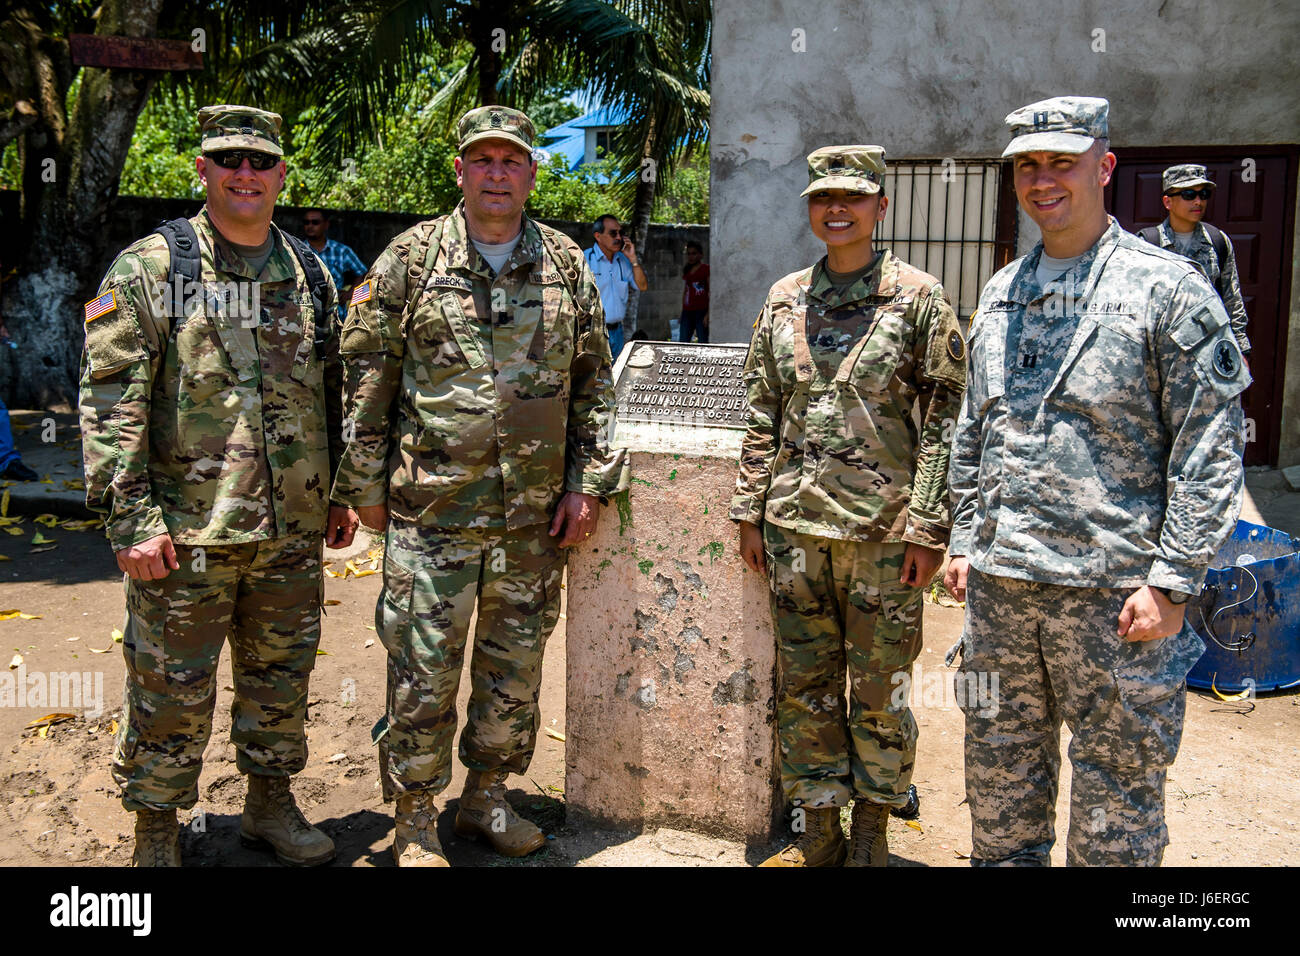 Members of the Civil Leader Engagement pose for a group photo at the Medical Readiness Training Exercise site in Cooperativa village, Colon, Apr. 21, 2017. Joint Task Force – Bravo Medical Element, provided care to more than 850 patients during a Medical Readiness Training Exercise in Cooperativa village, Colon, Honduras, Apr. 20-21, 2017. MEDEL also supported a Military Partnership Engagement and assisted more than 650 patients with the Hondurian Navy in Santa Rosa de Aguan, Colon, Honduras, Apr. 22, 2017. (U.S. Air National Guard photo by Master Sgt. Scott Thompson/released) Stock Photo